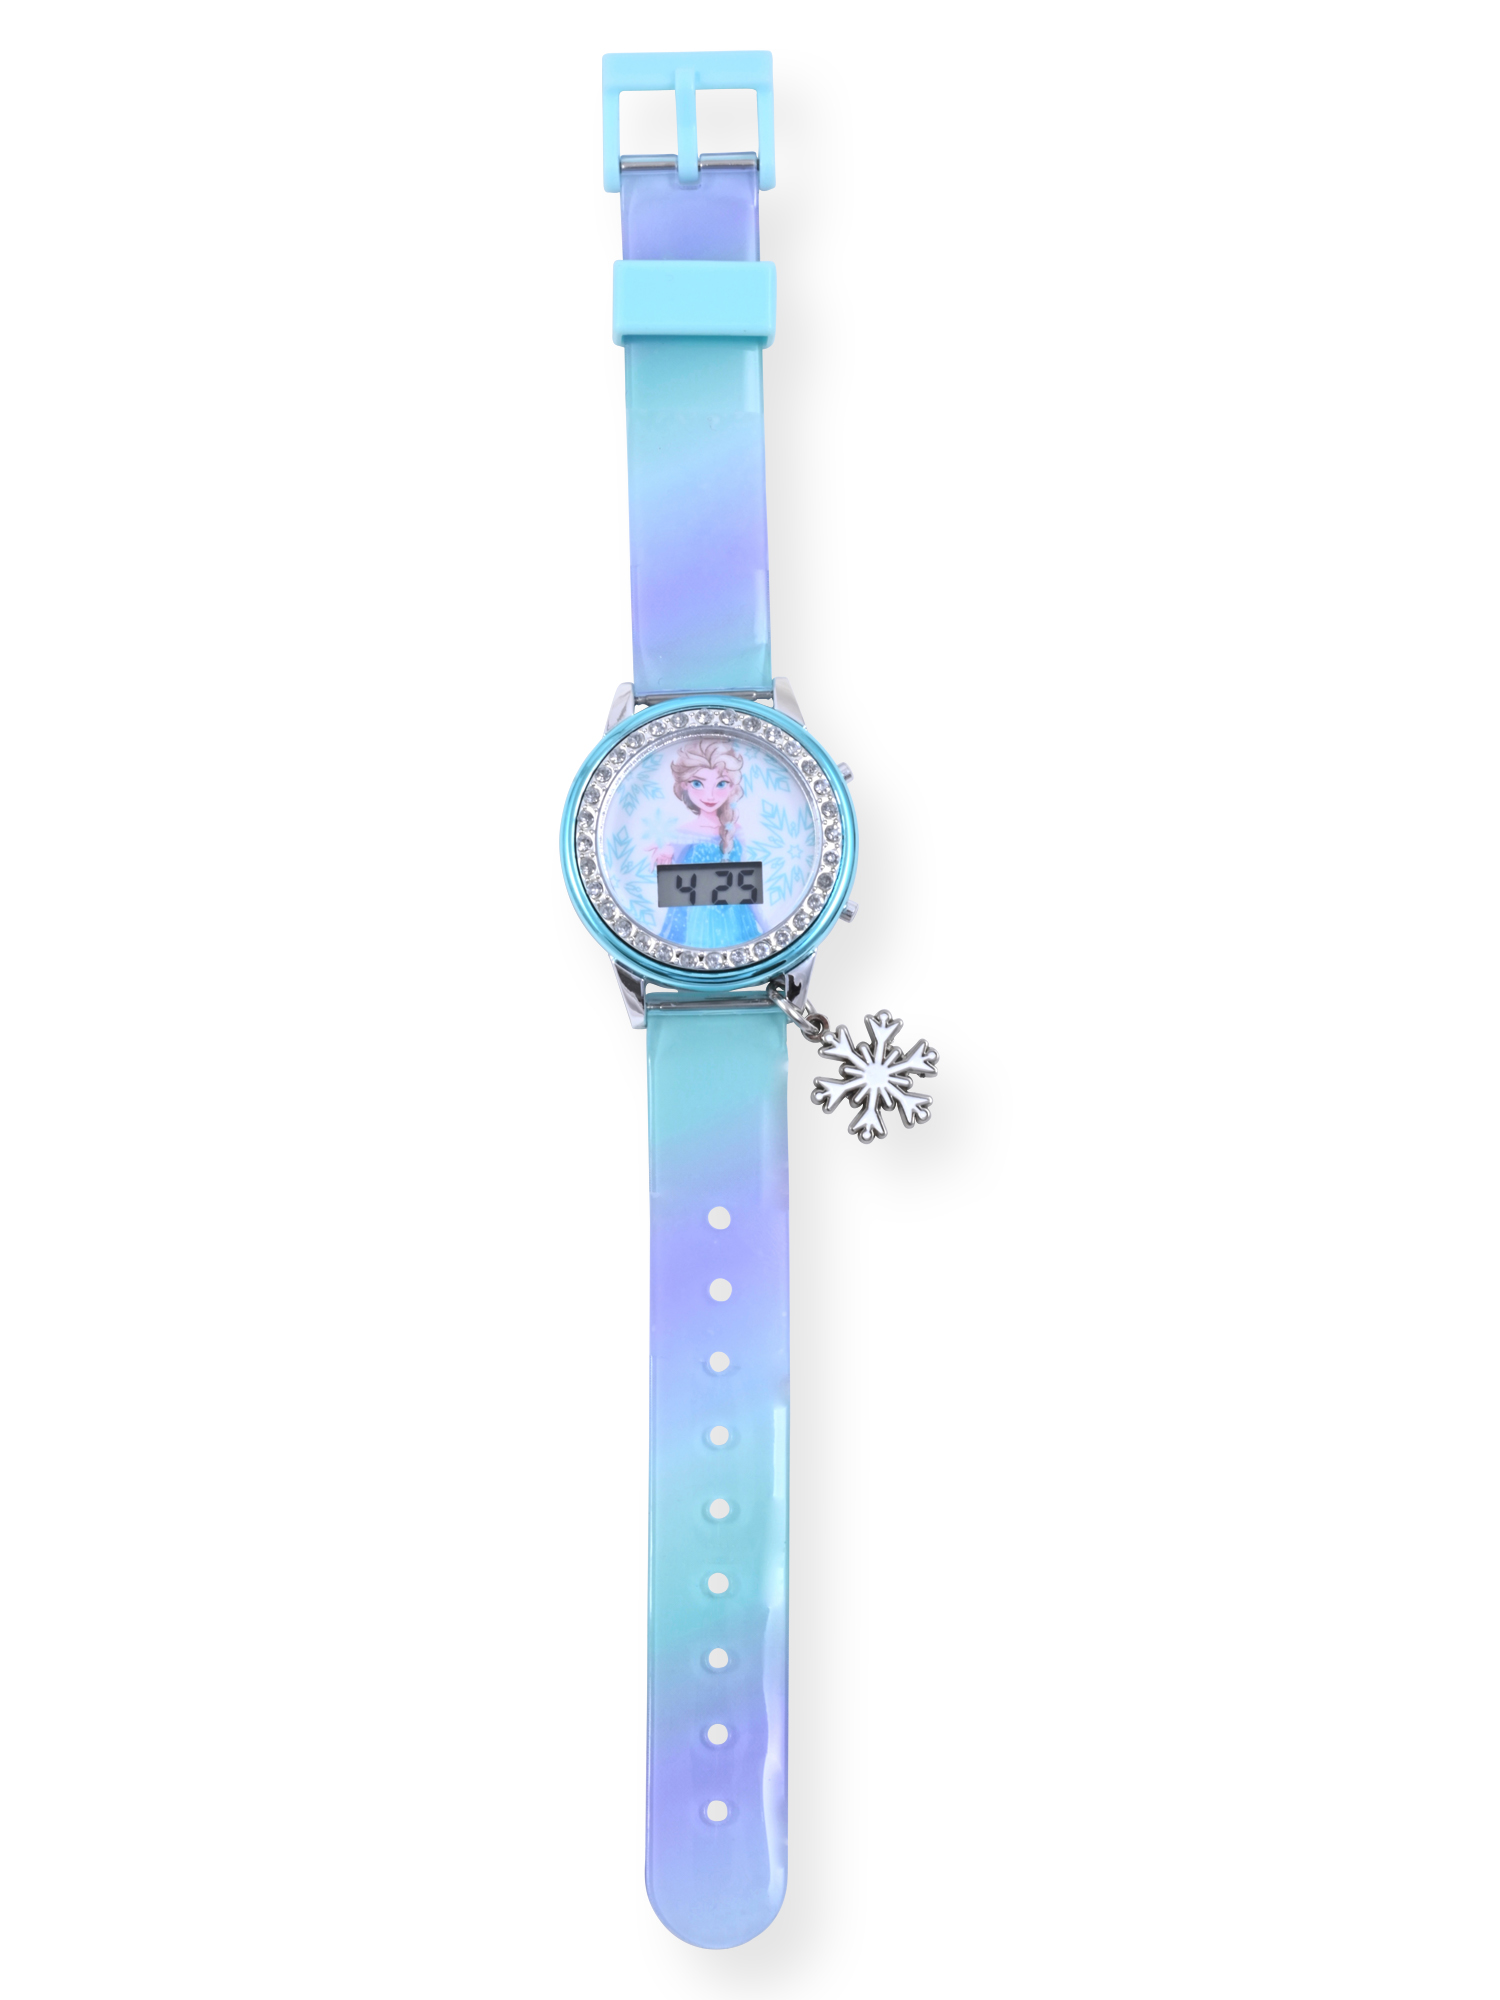 Disney Frozen Girls Flashing LCD Blue Ombre Silicone Watch, Bracelet and Hair Accessory 3 Piece Set - image 3 of 6